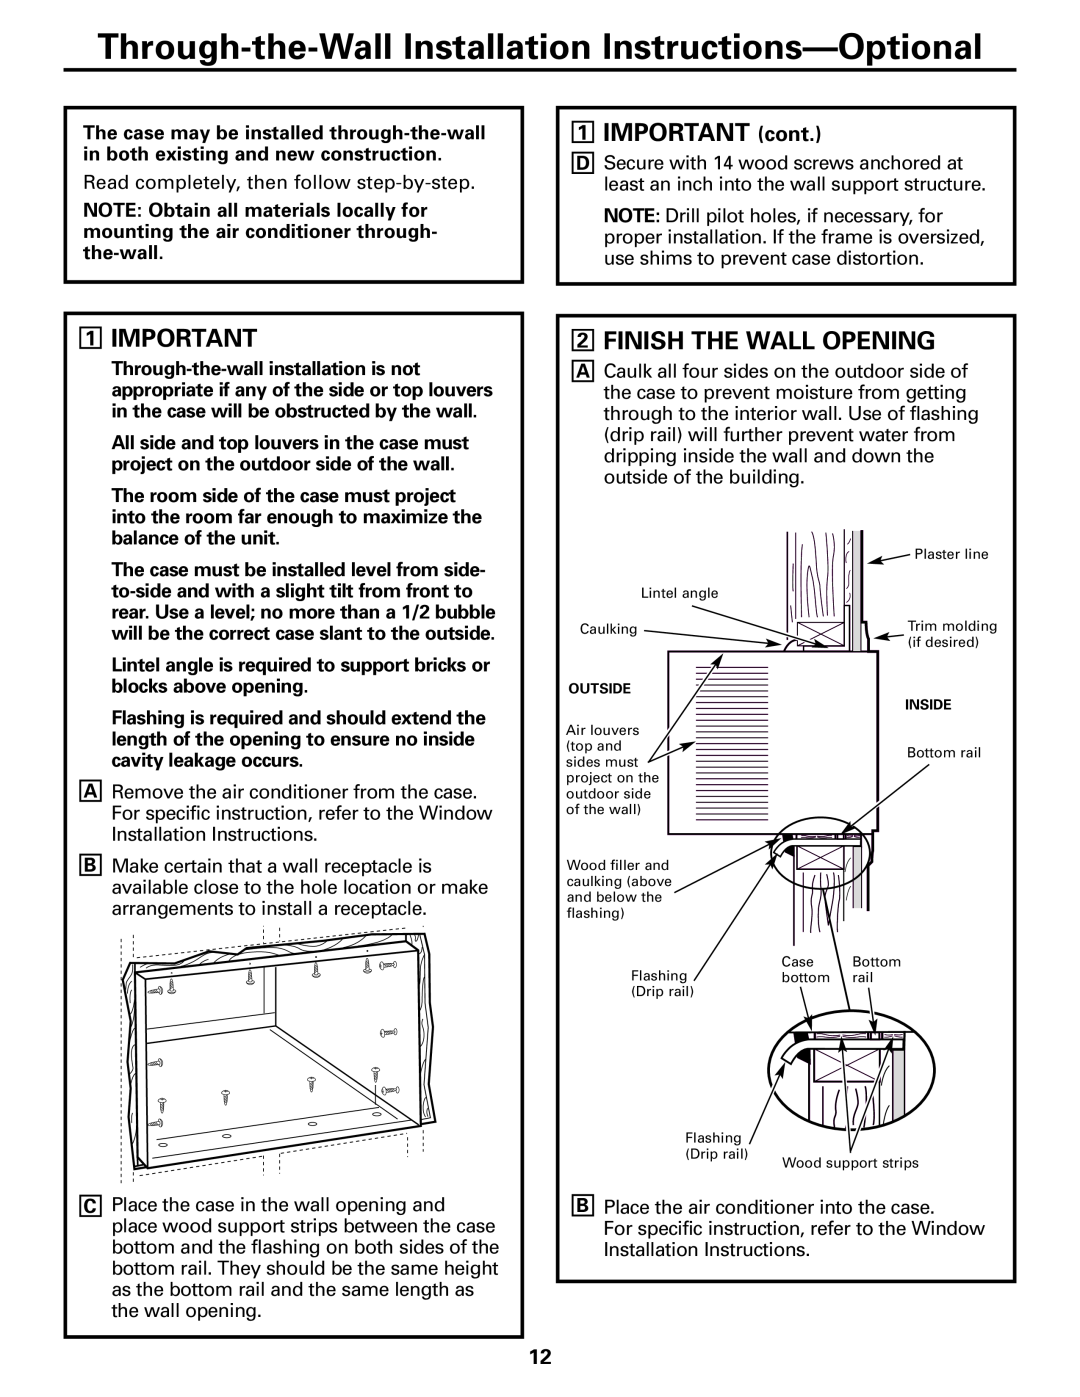 GE AEE08, AEE12 installation instructions IMPORTANT cont, 1IMPORTANT, 2FINISH THE WALL OPENING 